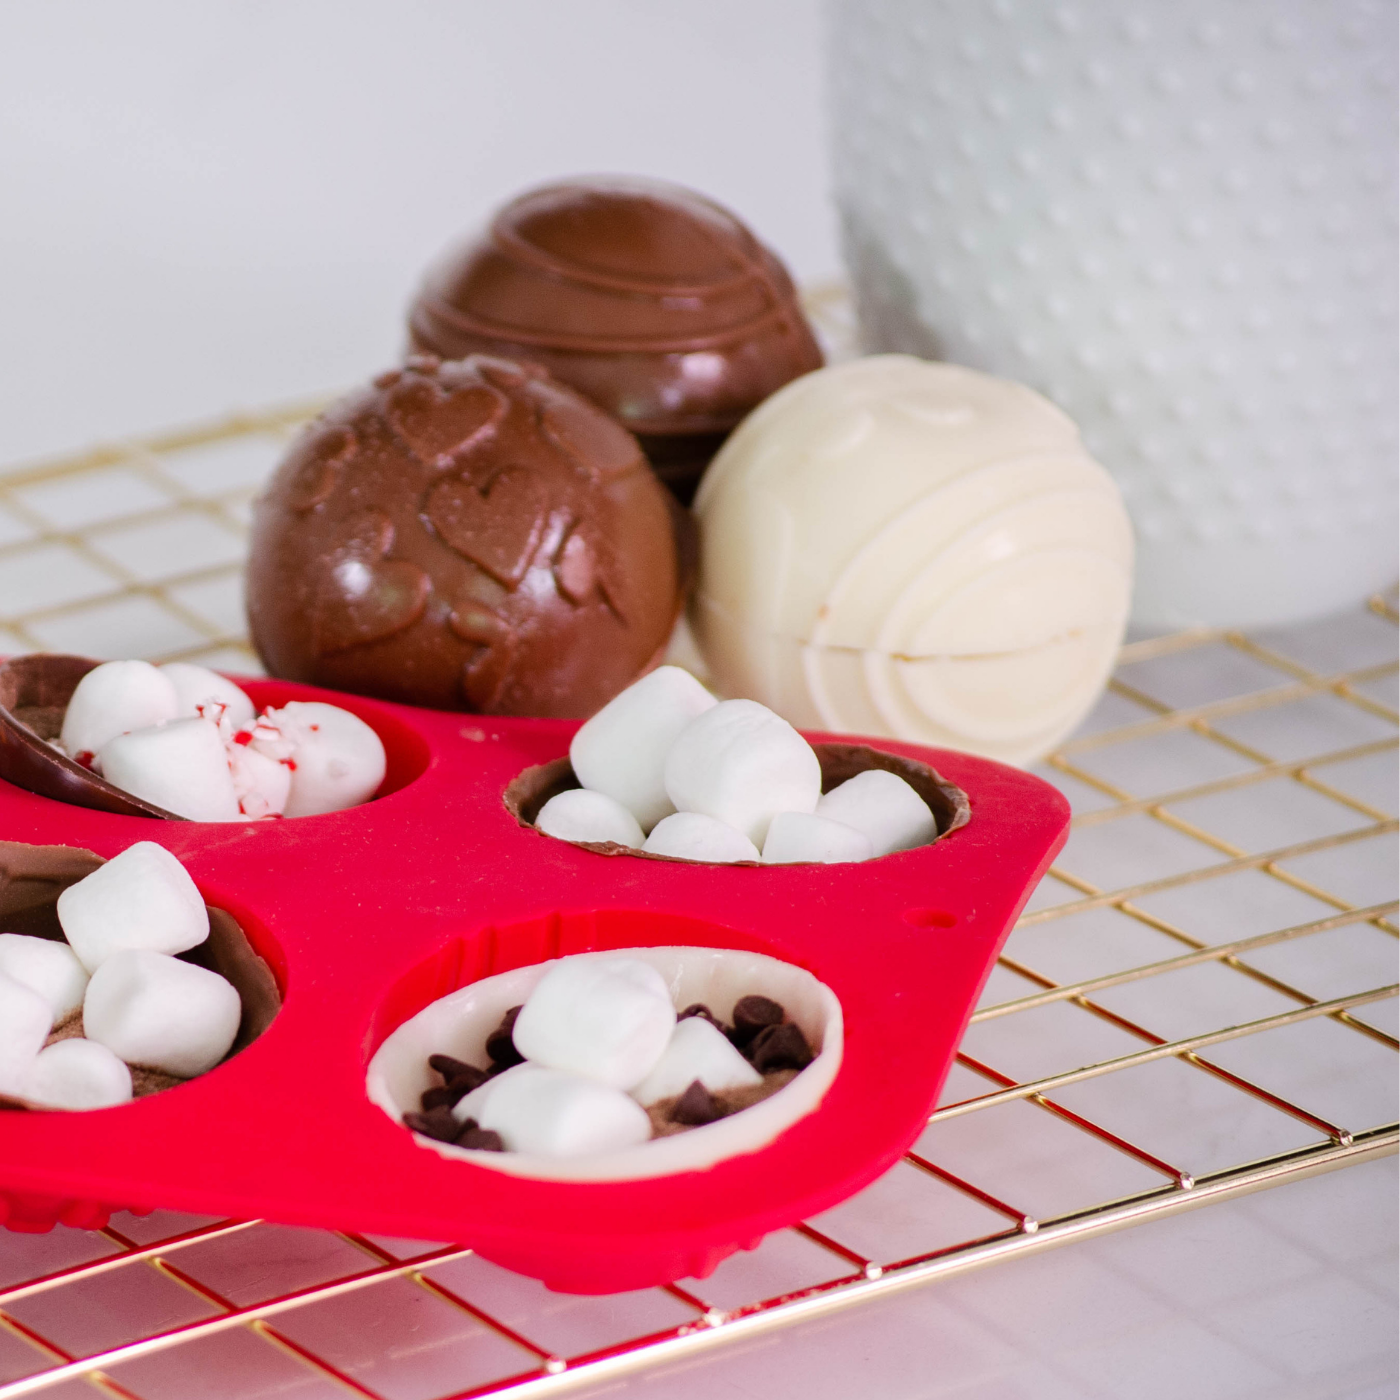 Lifestyle image of 3 complete hot cocoa bombs along with spheres half filled with cocoa bomb toppings such as marshmallows and chocolate chips 